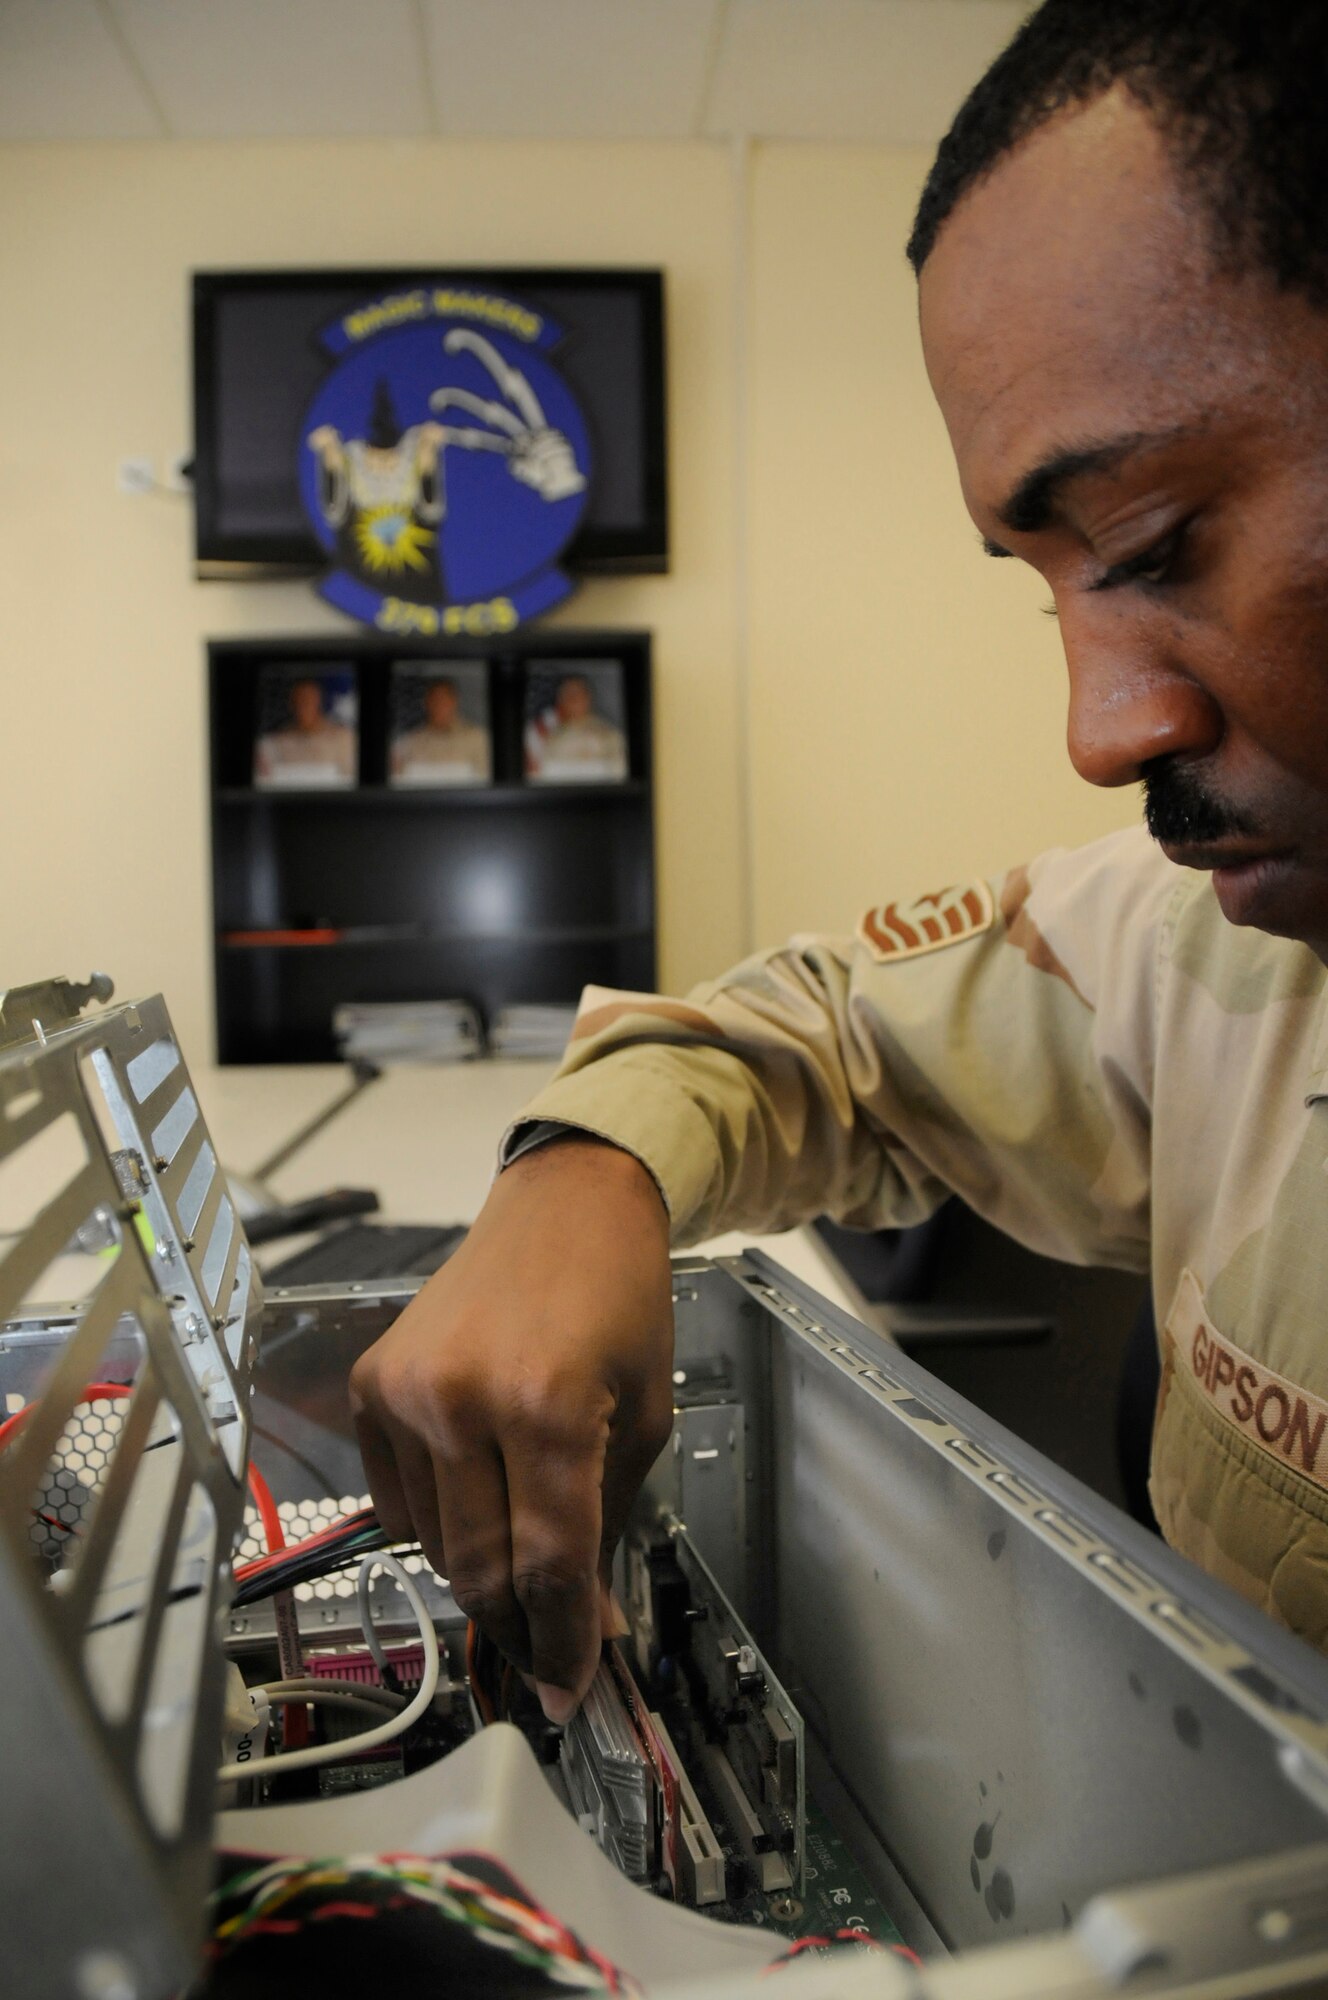 Tech. Sgt. Thomas Gipson, resource advisor for the 379th Expeditionary Communications Squadron, installs dual video cards in a personal computer Sept. 7, 2008, at an undisclosed location in Southwest Asia. Sergeant Gipson and other resource advisors here approve and purchase communications devices for use in support of Operations Iraqi and Enduring Freedom and Joint Task Force-Horn of Africa. Sergeant Gipson, a native of Waycross, Ga., is deployed from Scott Air Force Base, Ill. (U.S. Air Force photo by Staff Sgt. Darnell T. Cannady/Released)